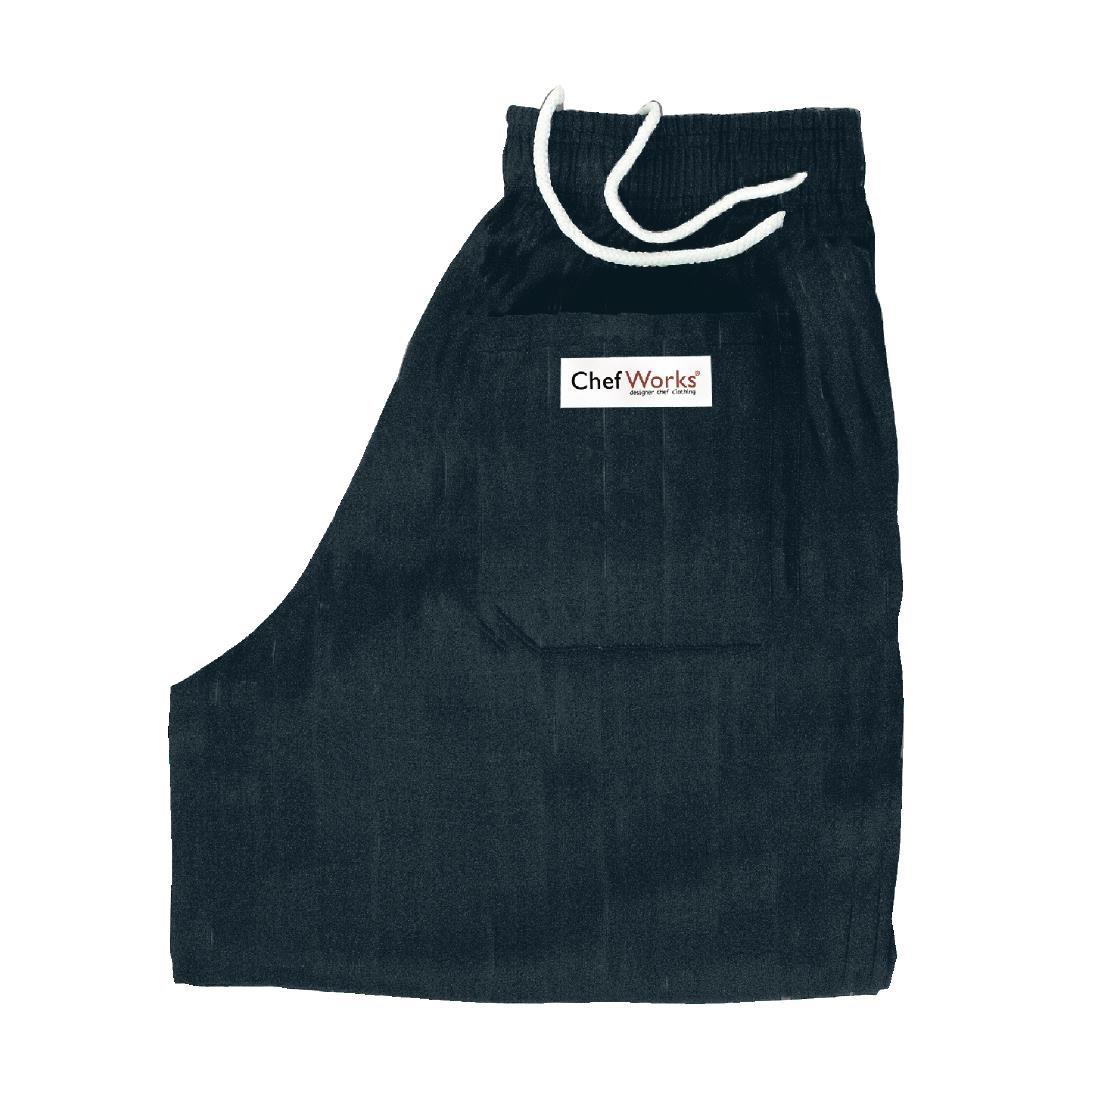 Chef Works Essential Baggy Trousers Black XS - A029-XS  - 3